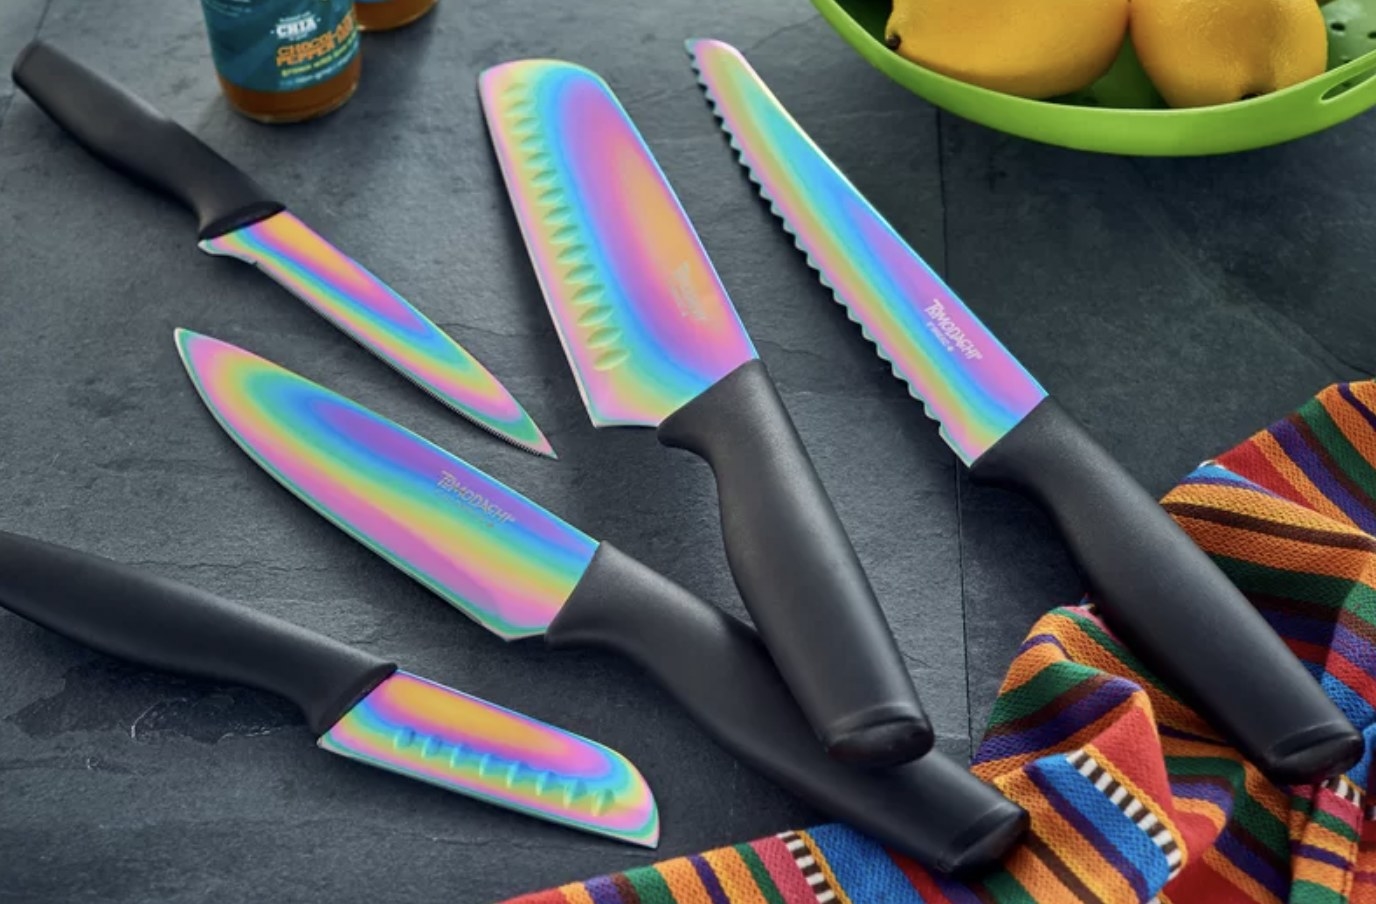 The six knives